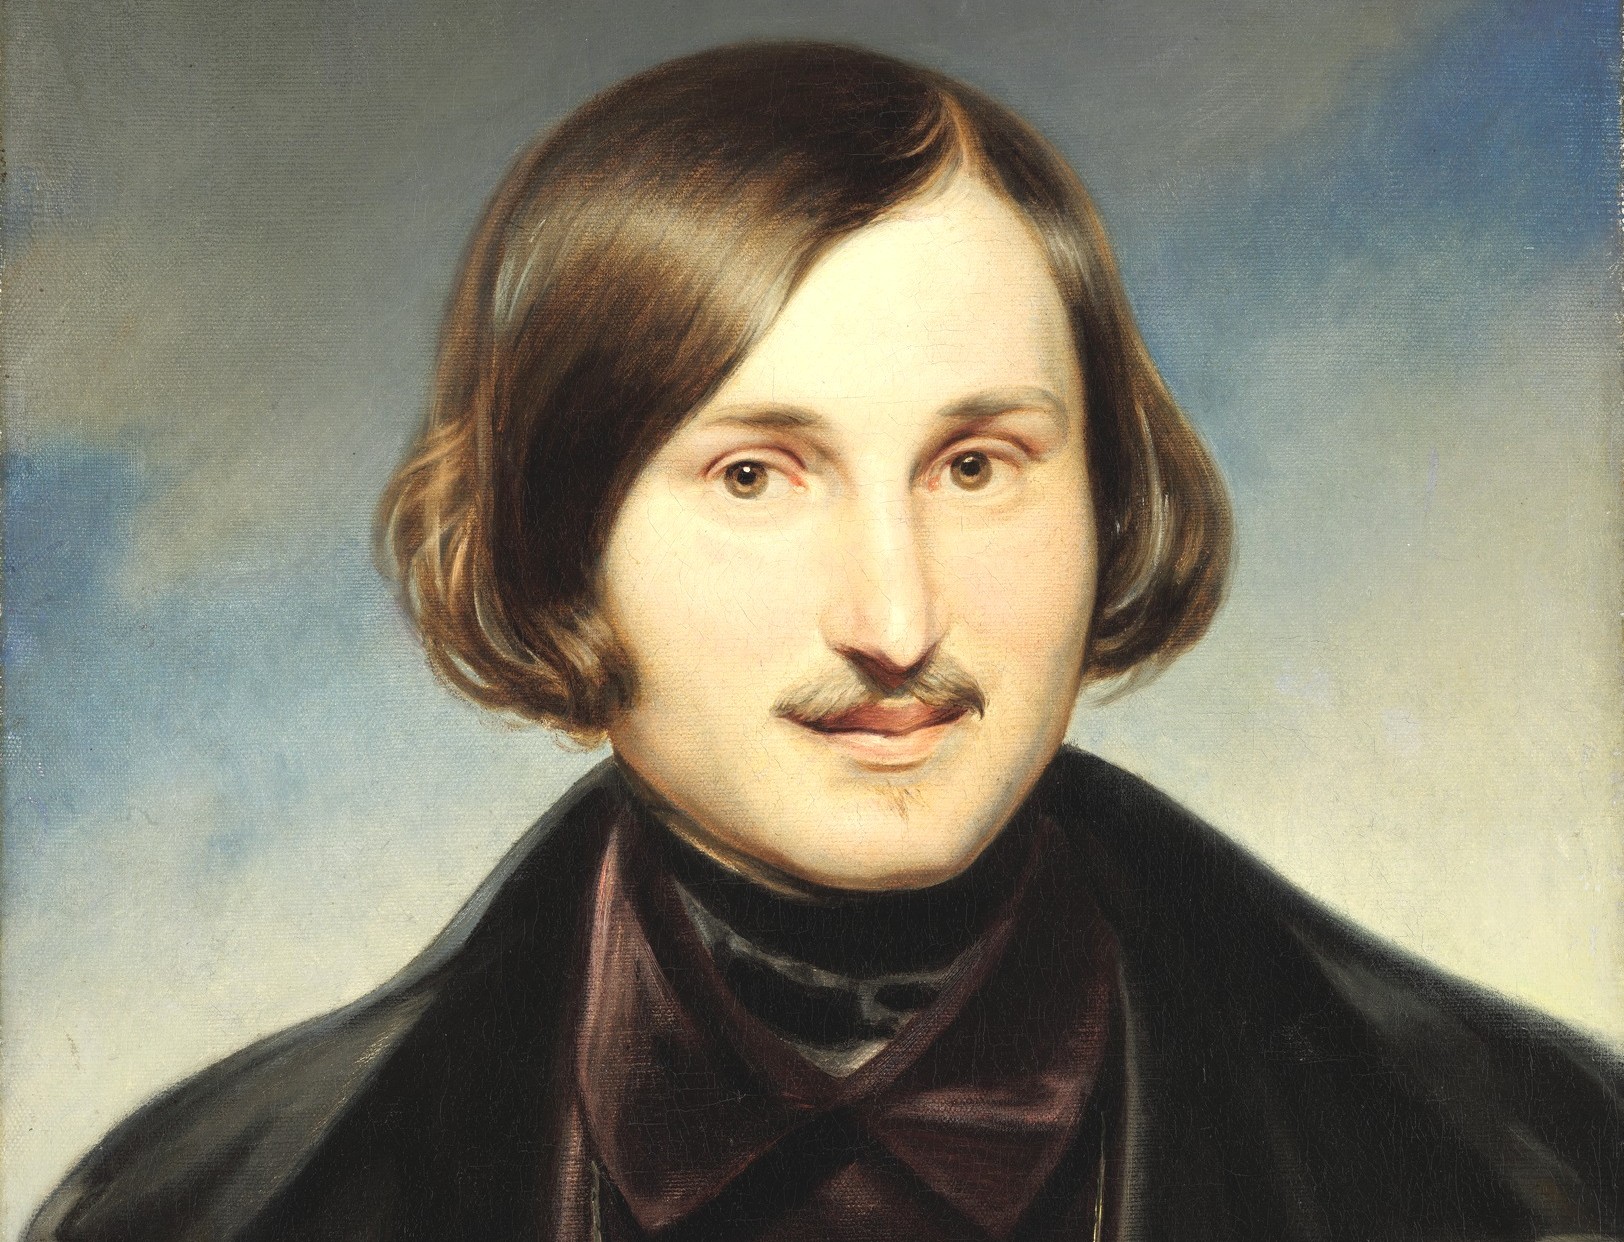 “Absolute nonsense”–Gogol’s tales